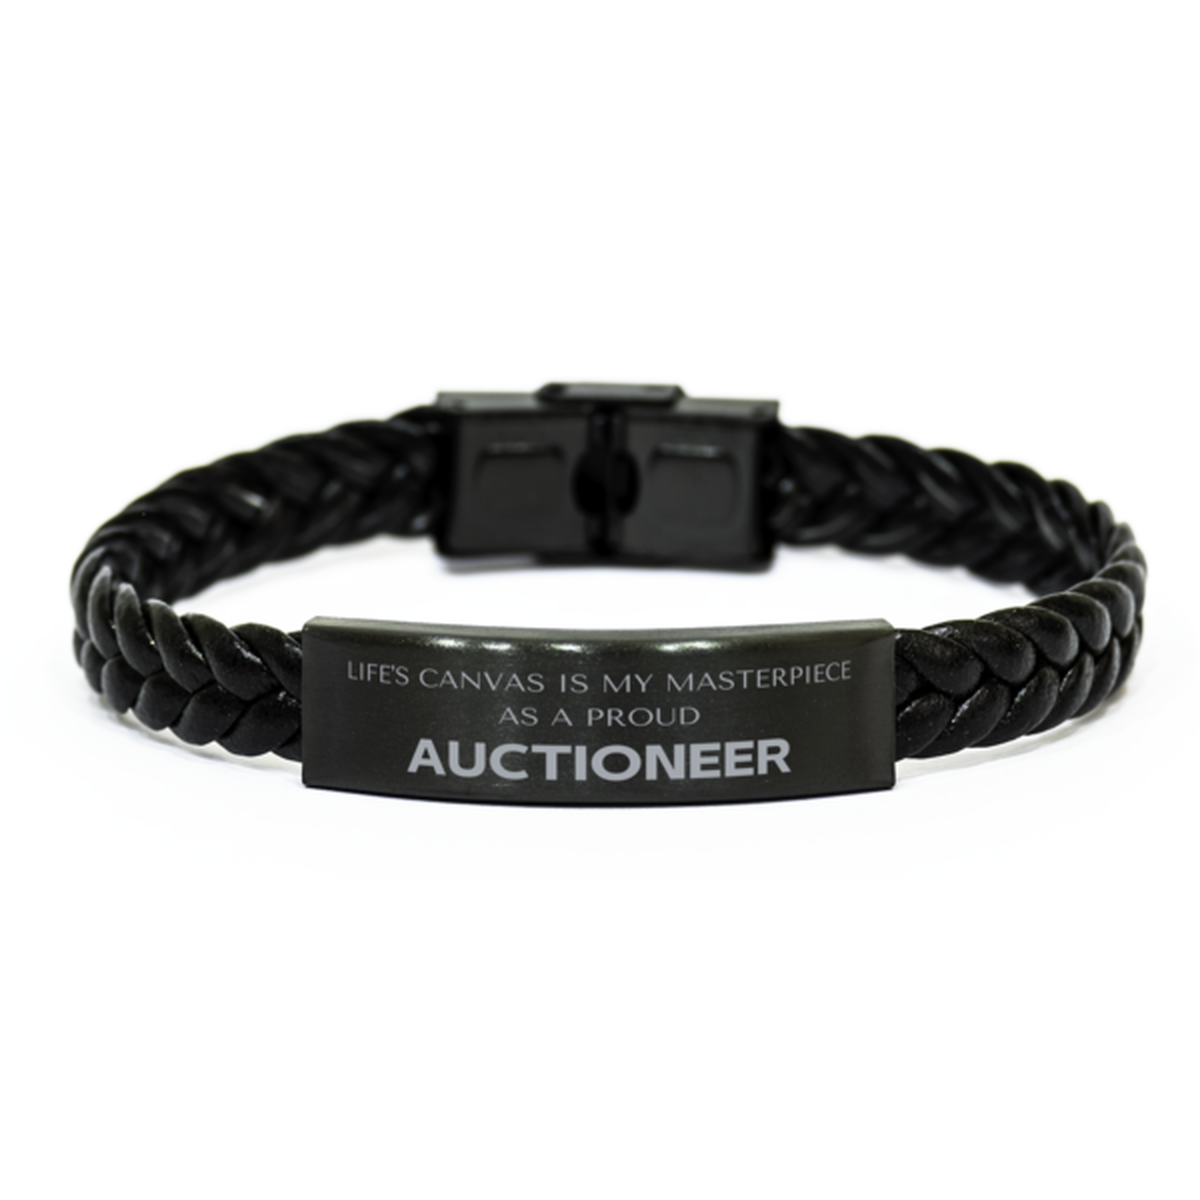 Proud Auctioneer Gifts, Life's canvas is my masterpiece, Epic Birthday Christmas Unique Braided Leather Bracelet For Auctioneer, Coworkers, Men, Women, Friends